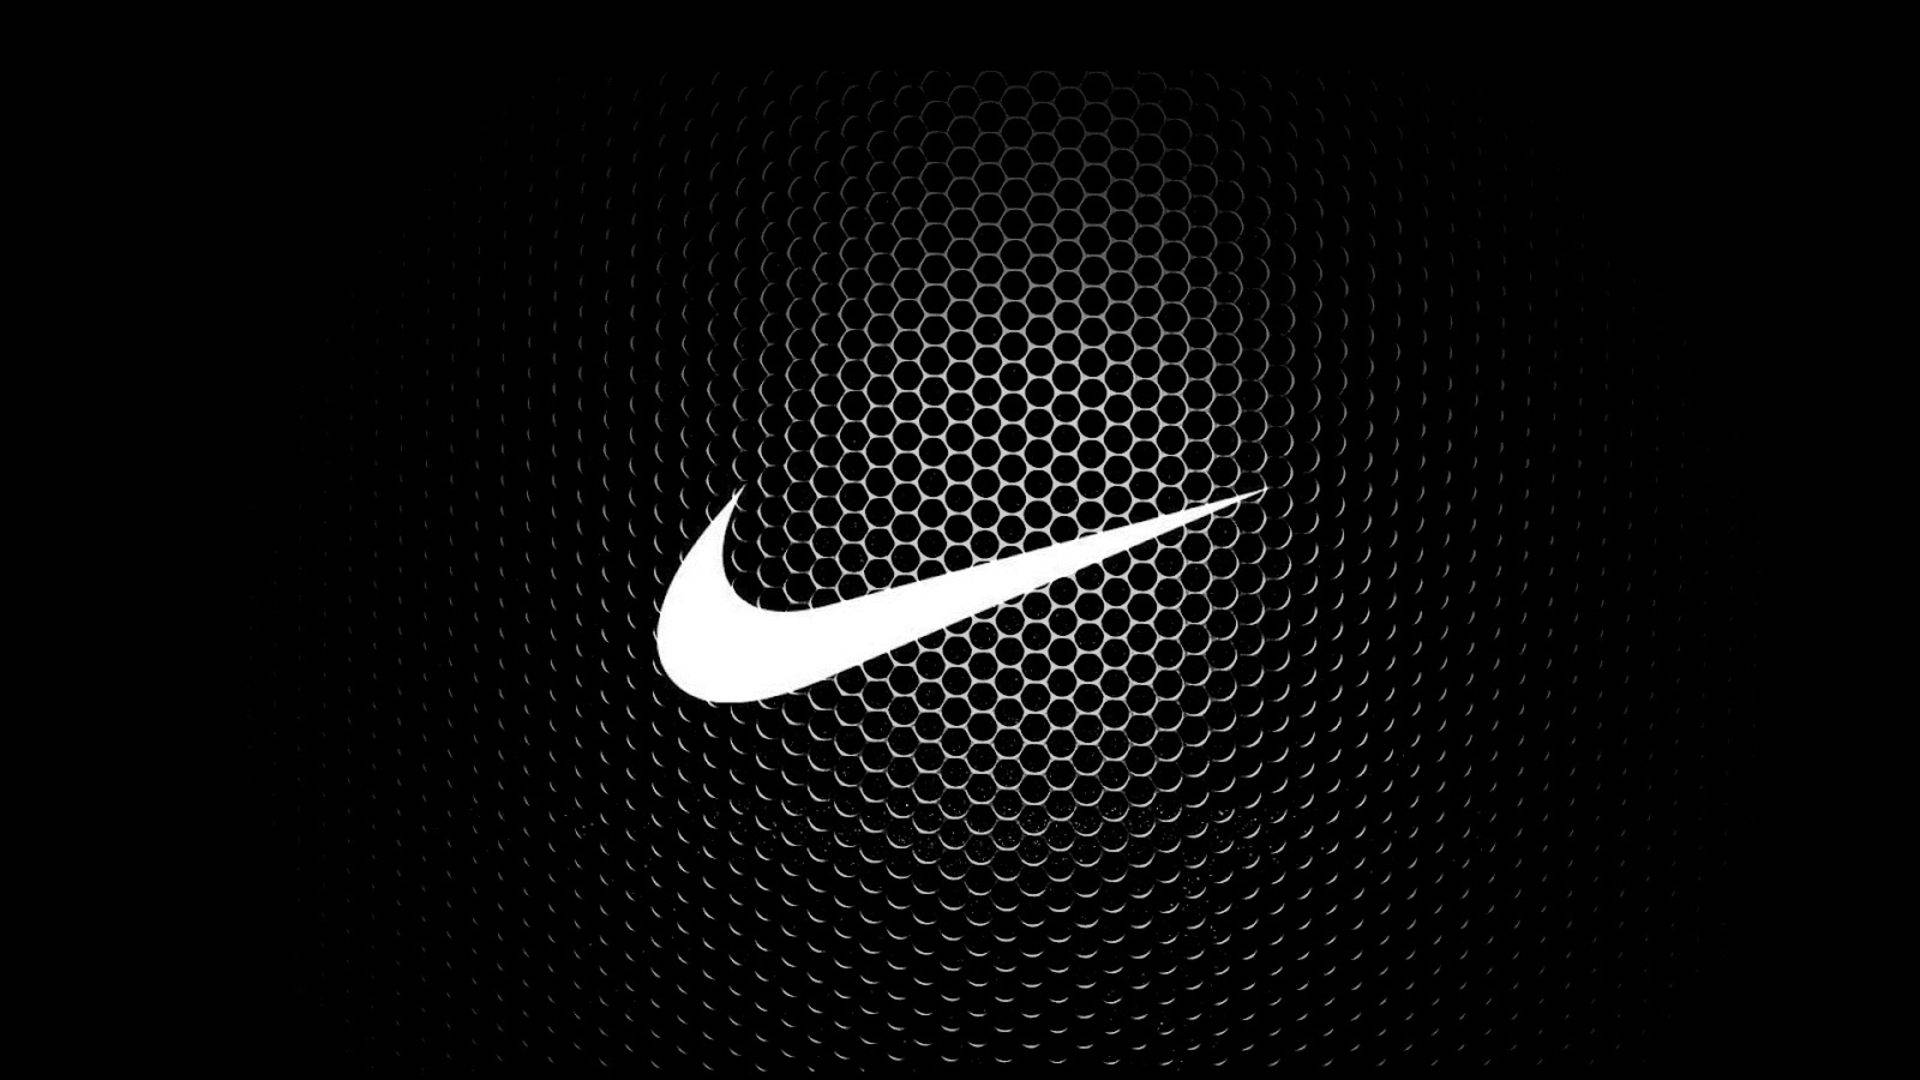 Nike 1920X1080 Wallpaper and Background Image